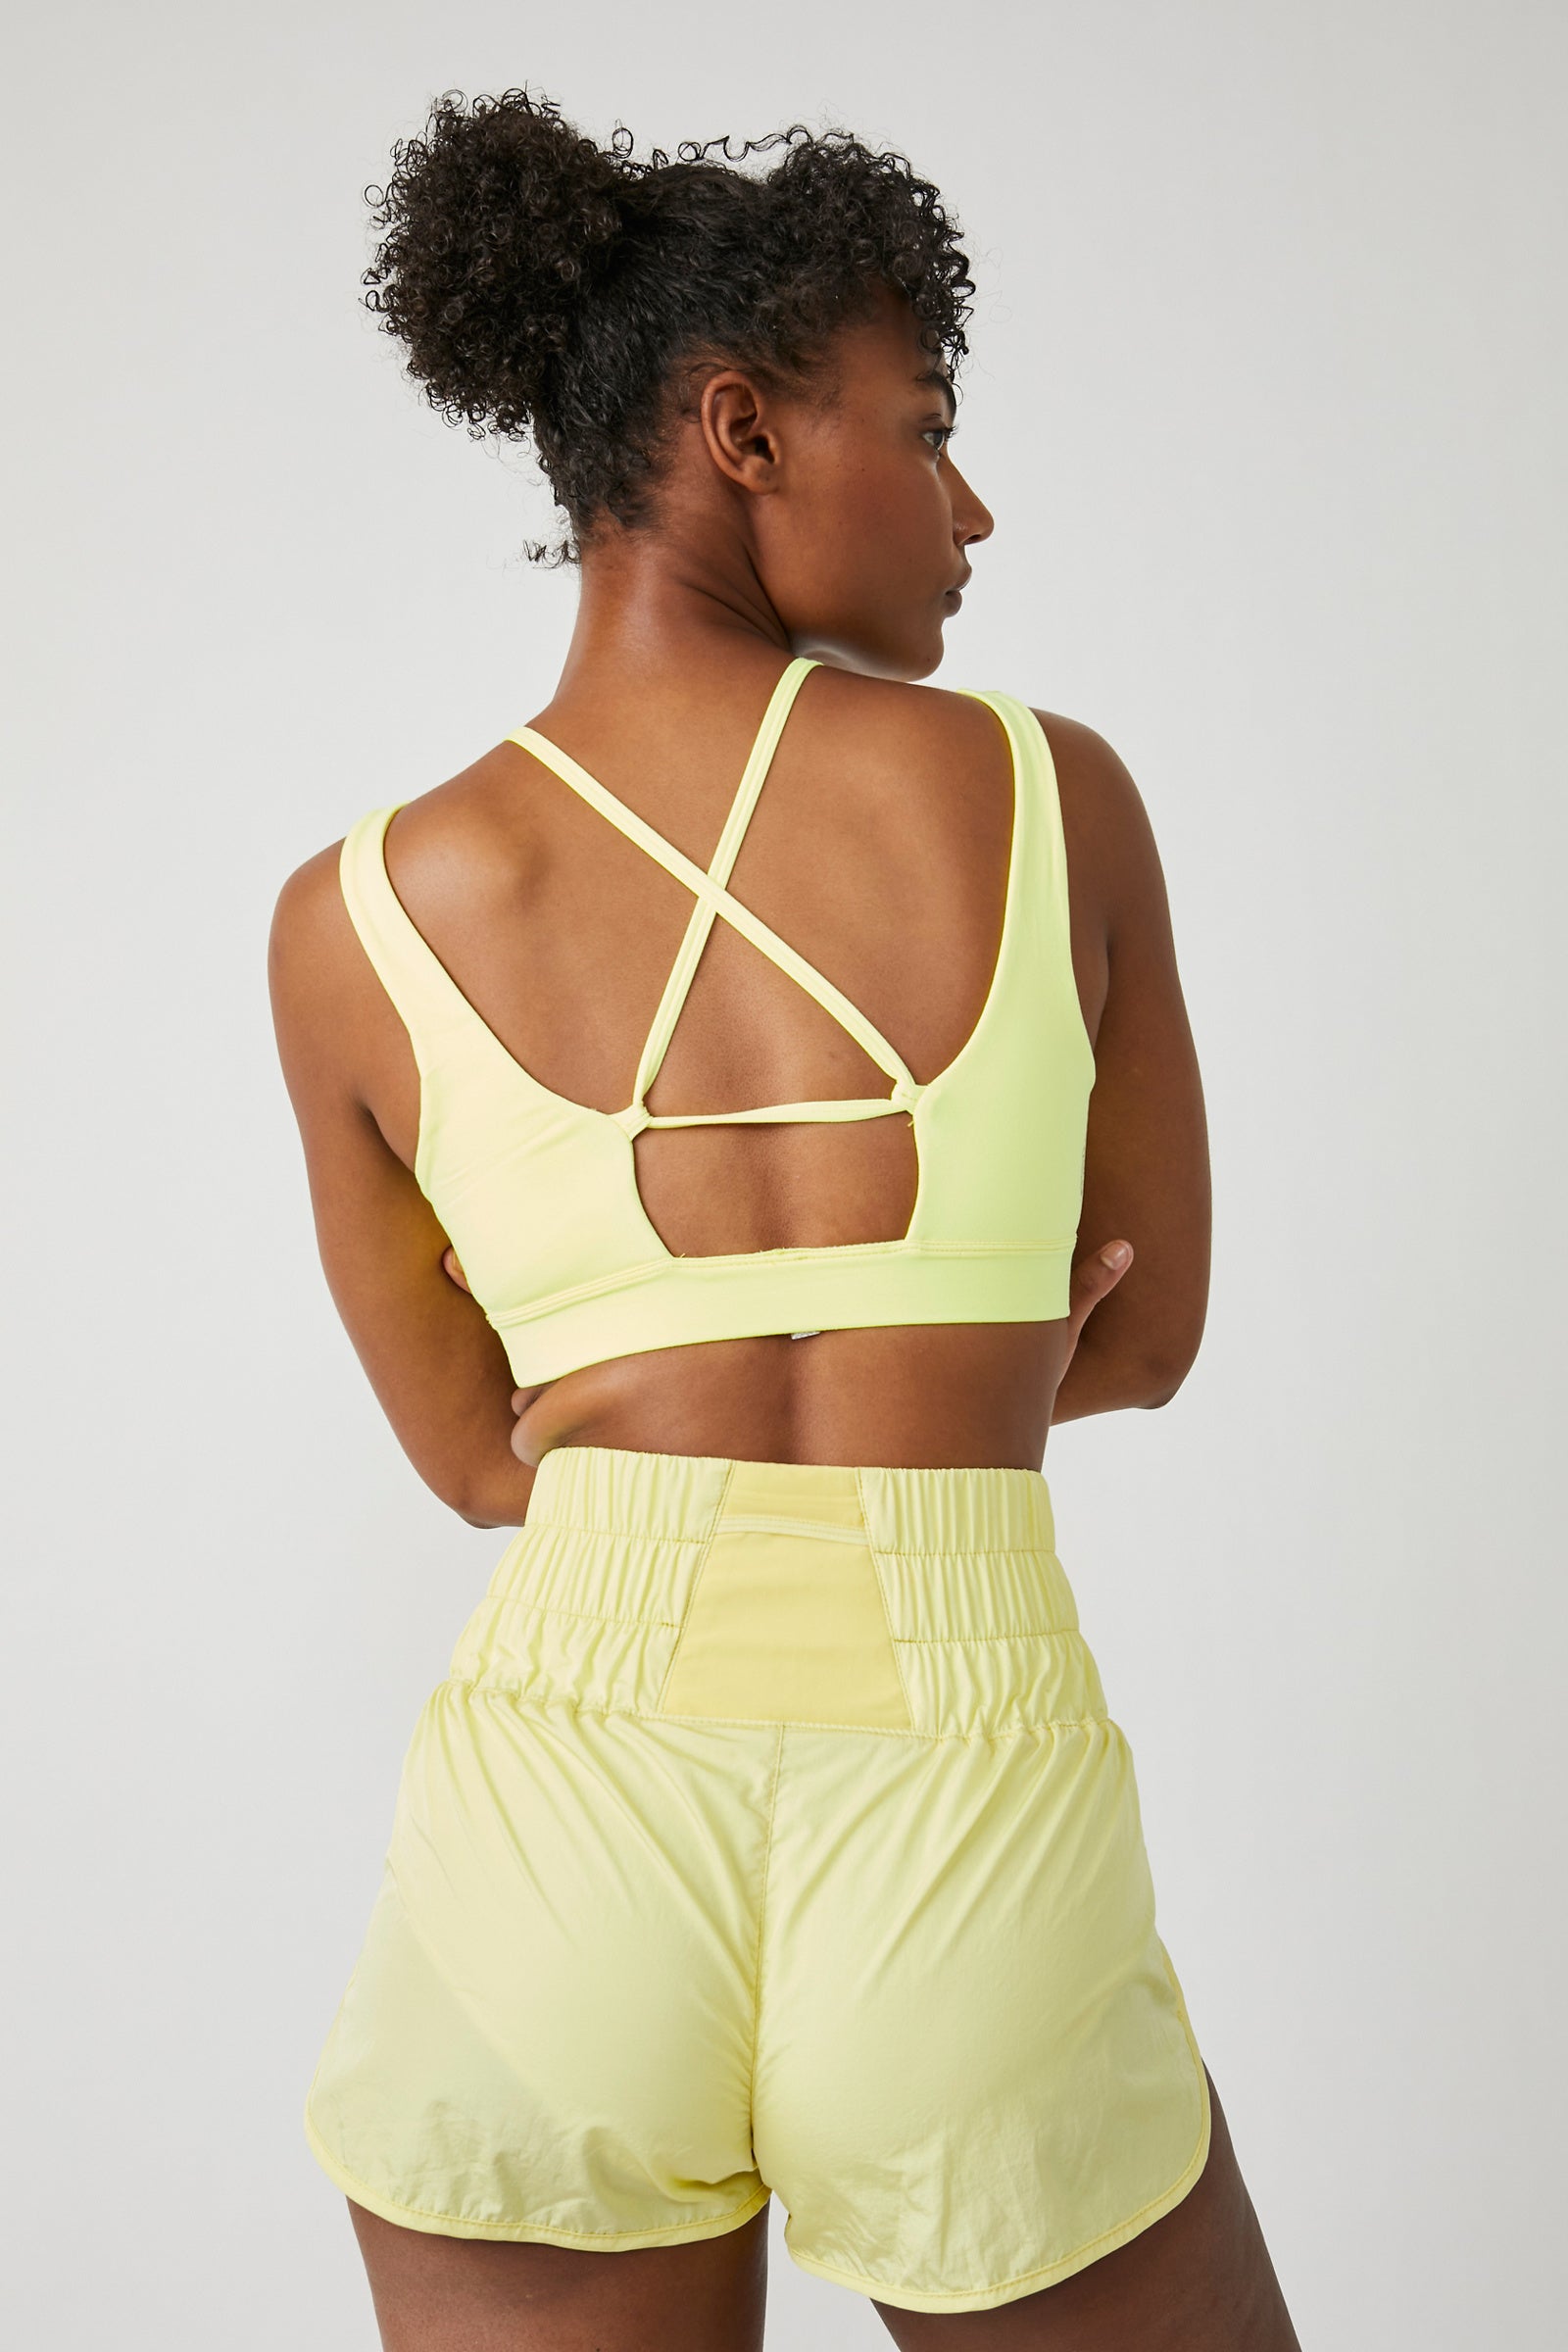 FREE PEOPLE WAY HOME THE LEMON 8291 MOVEMENT It Work - – VERBENA SHORT Out